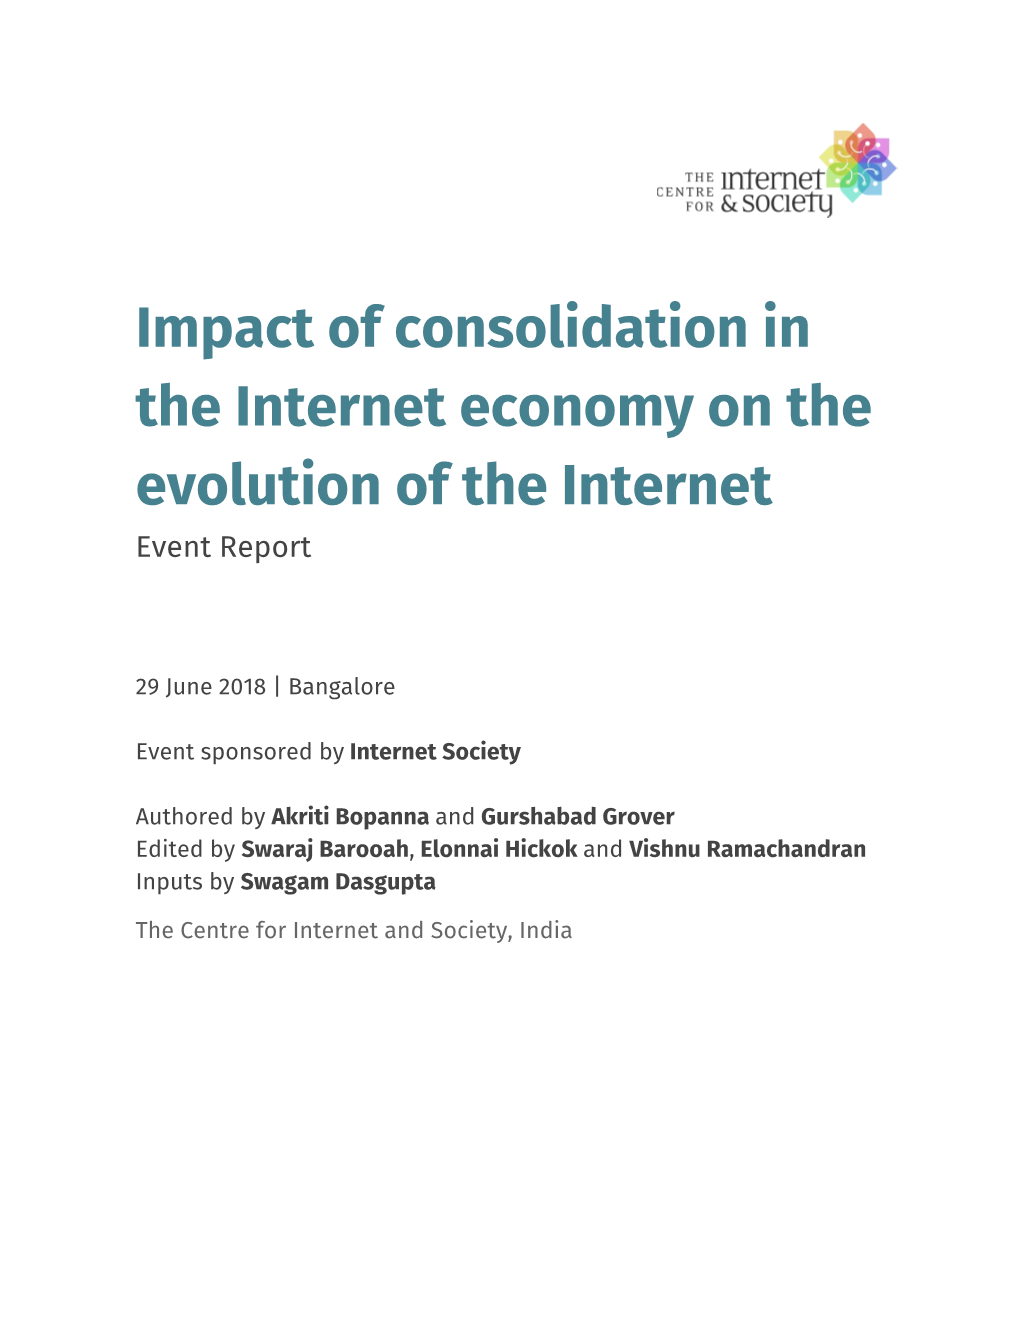 Impact of Consolidation in the Internet Economy on the Evolution of the Internet Event Report